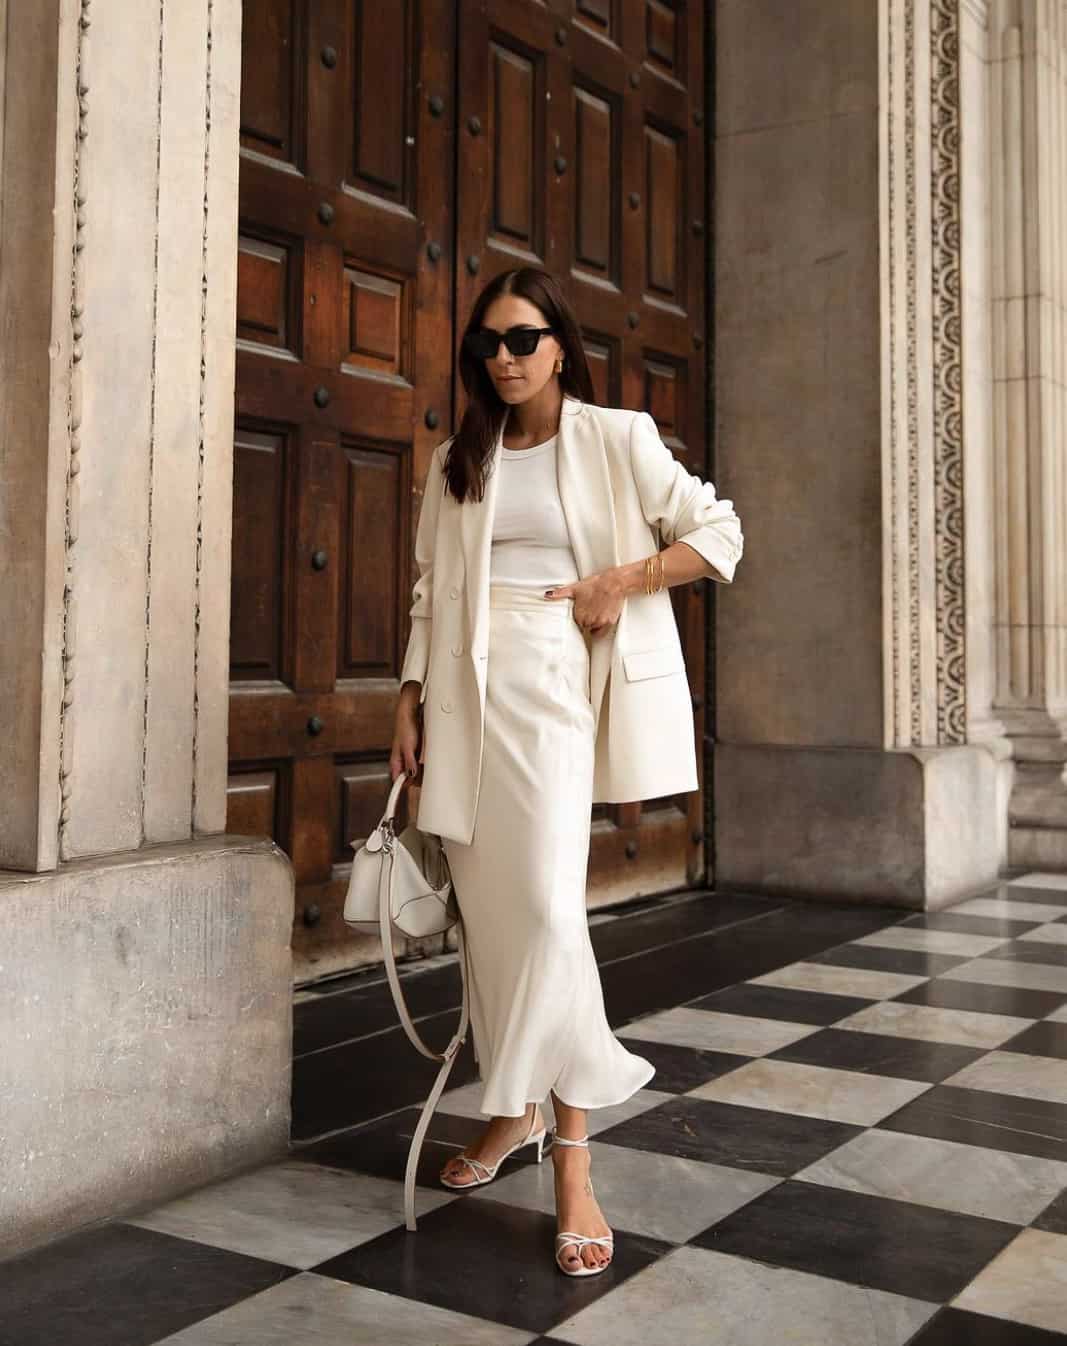 A woman wearing a full white outfit consisting of a silk midi skirt, tank top, blazer, strappy heels, and a handbag